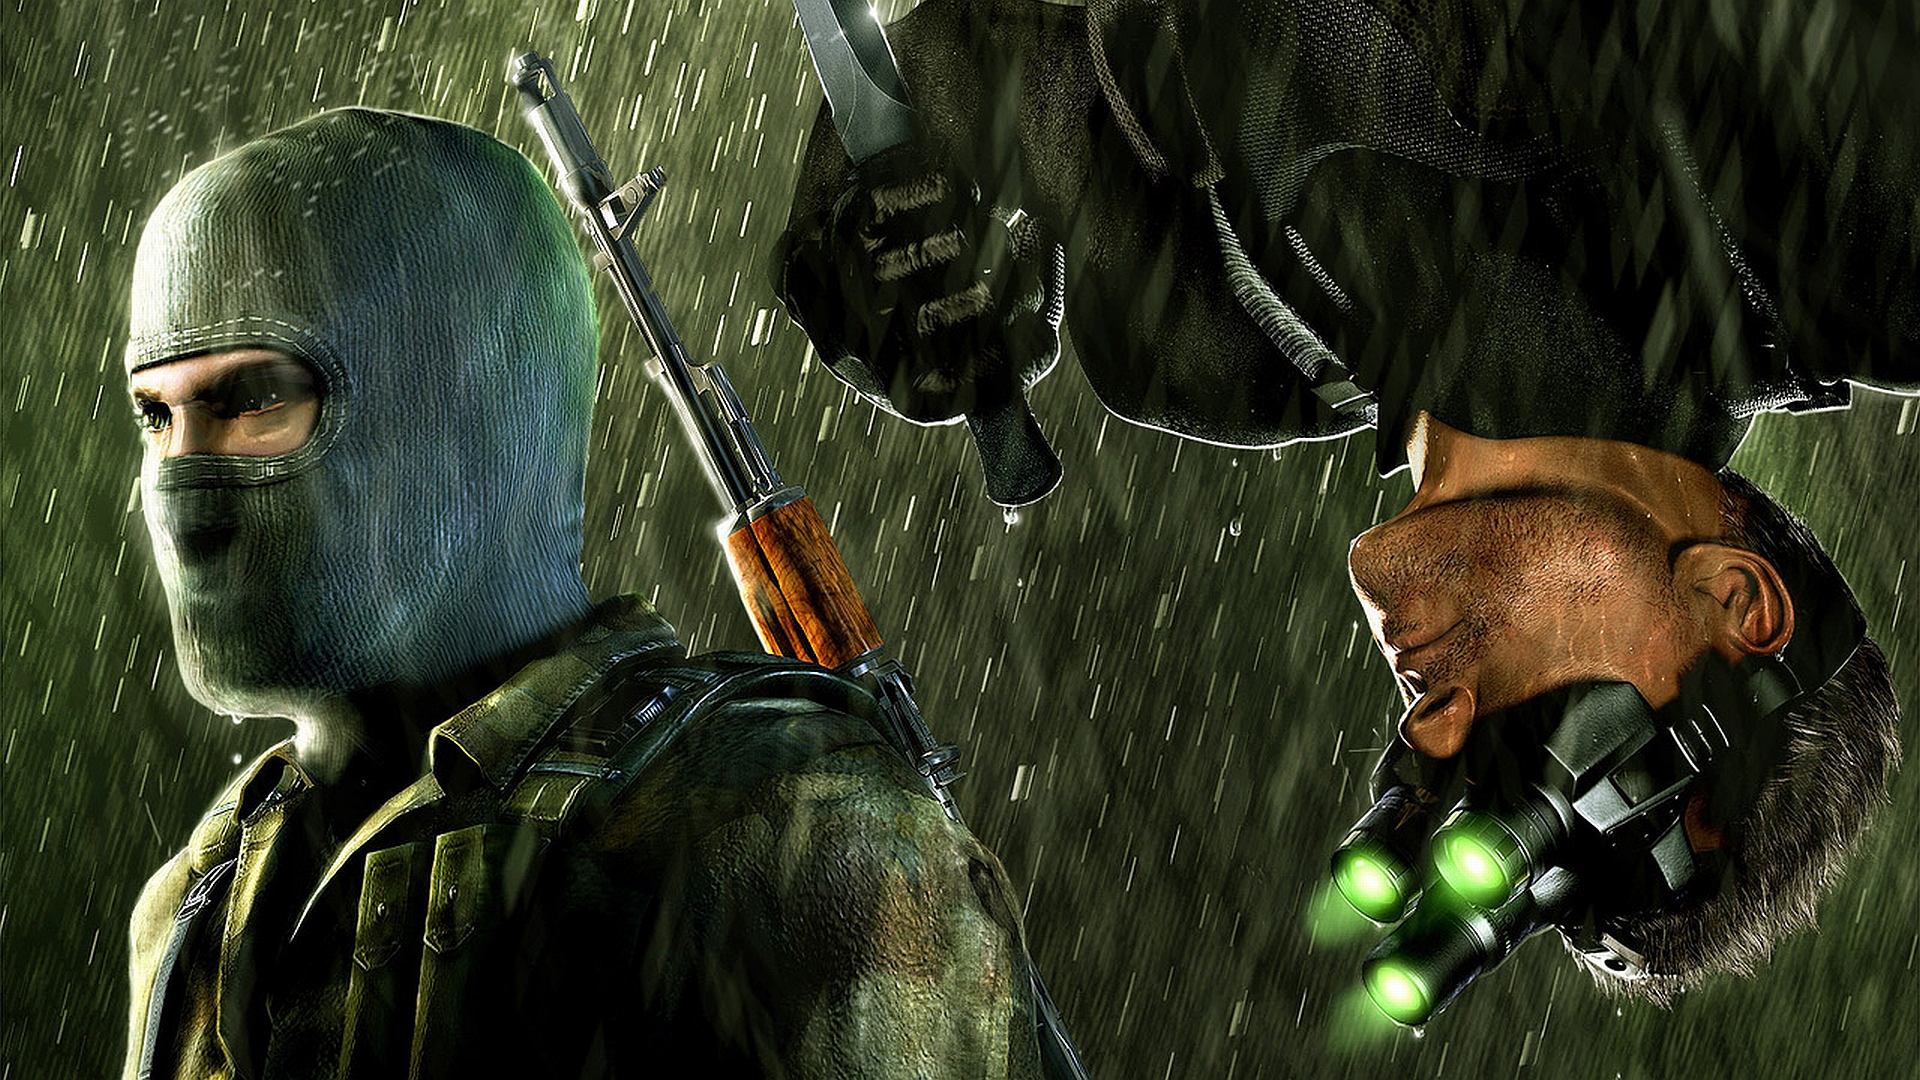 Splinter Cell's Sam Fisher hanging upside down, preparing to assassinate an armed guard